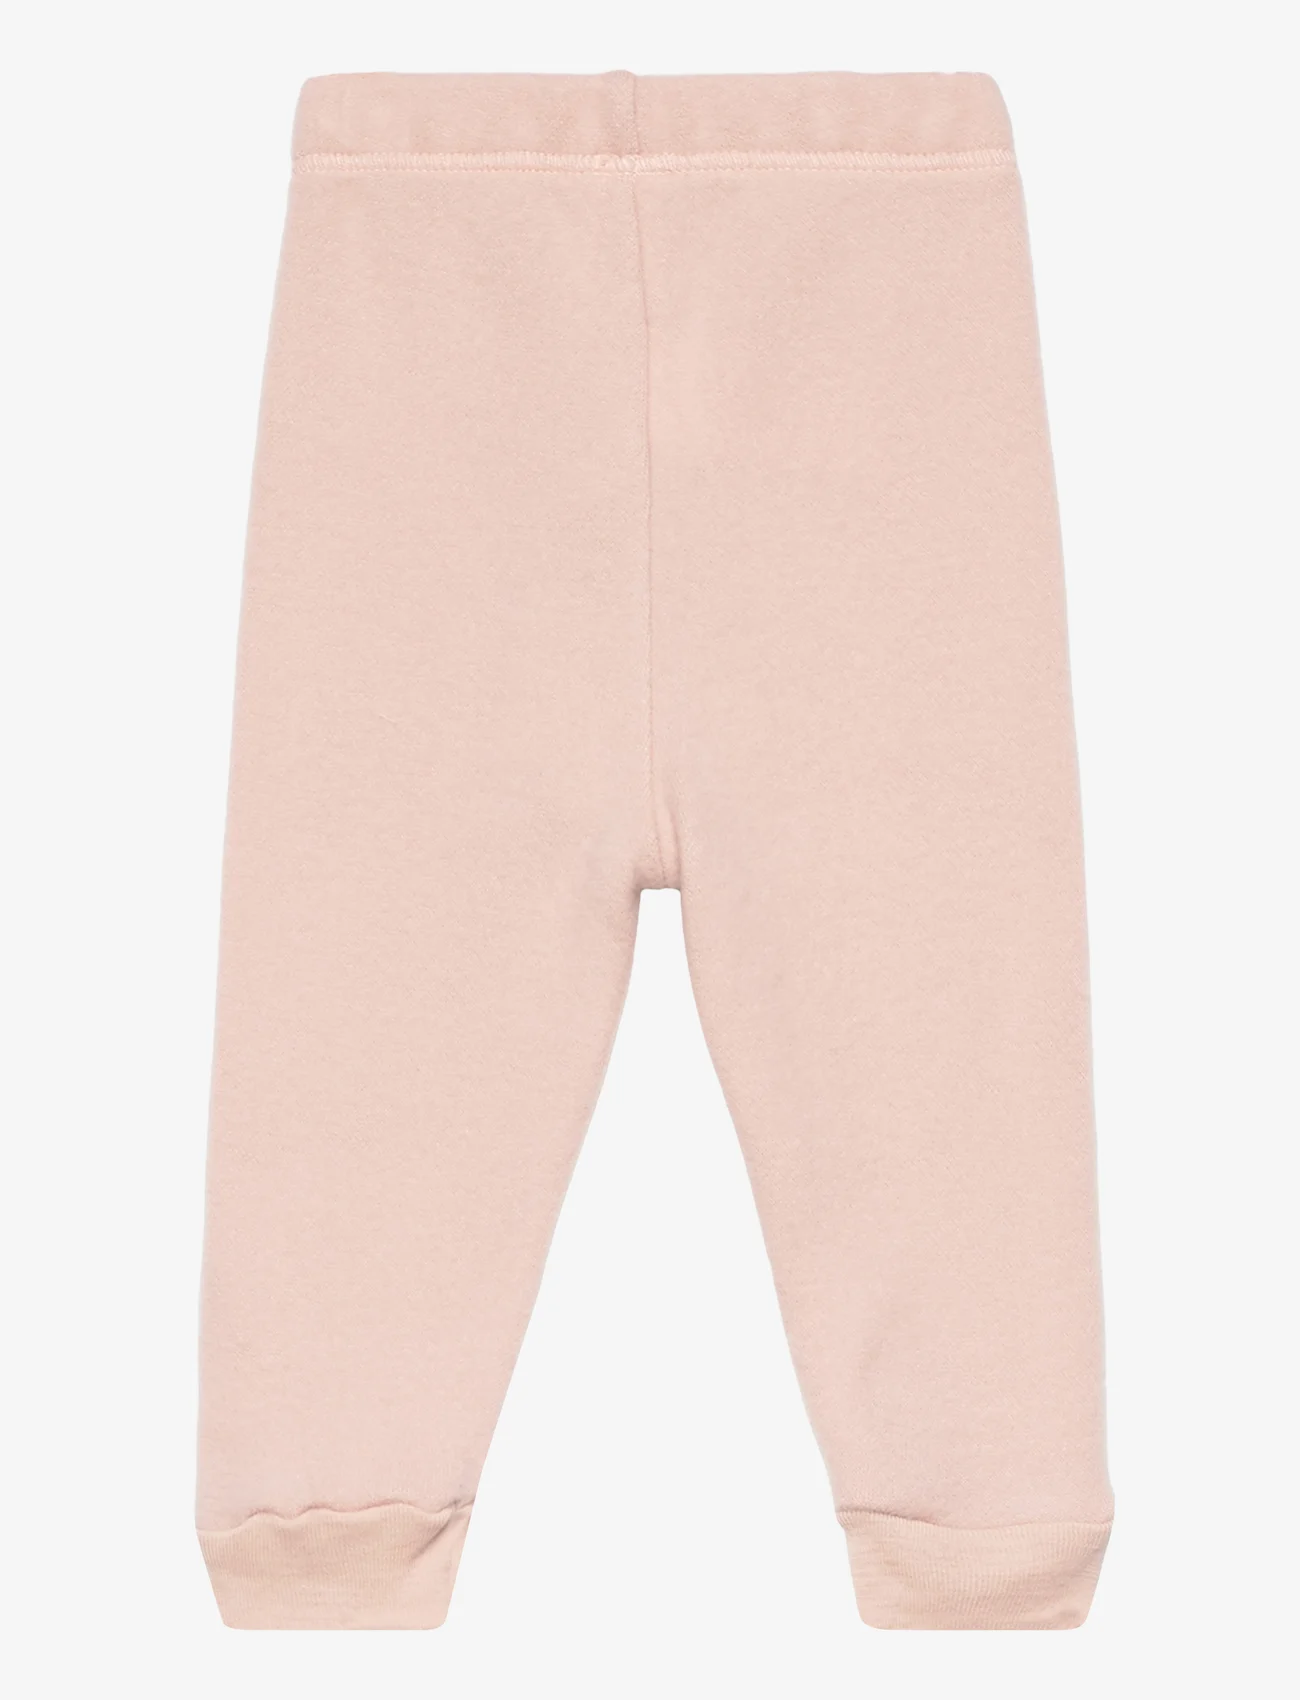 Müsli by Green Cotton - Woolly fleece pants baby - lowest prices - spa rose - 1